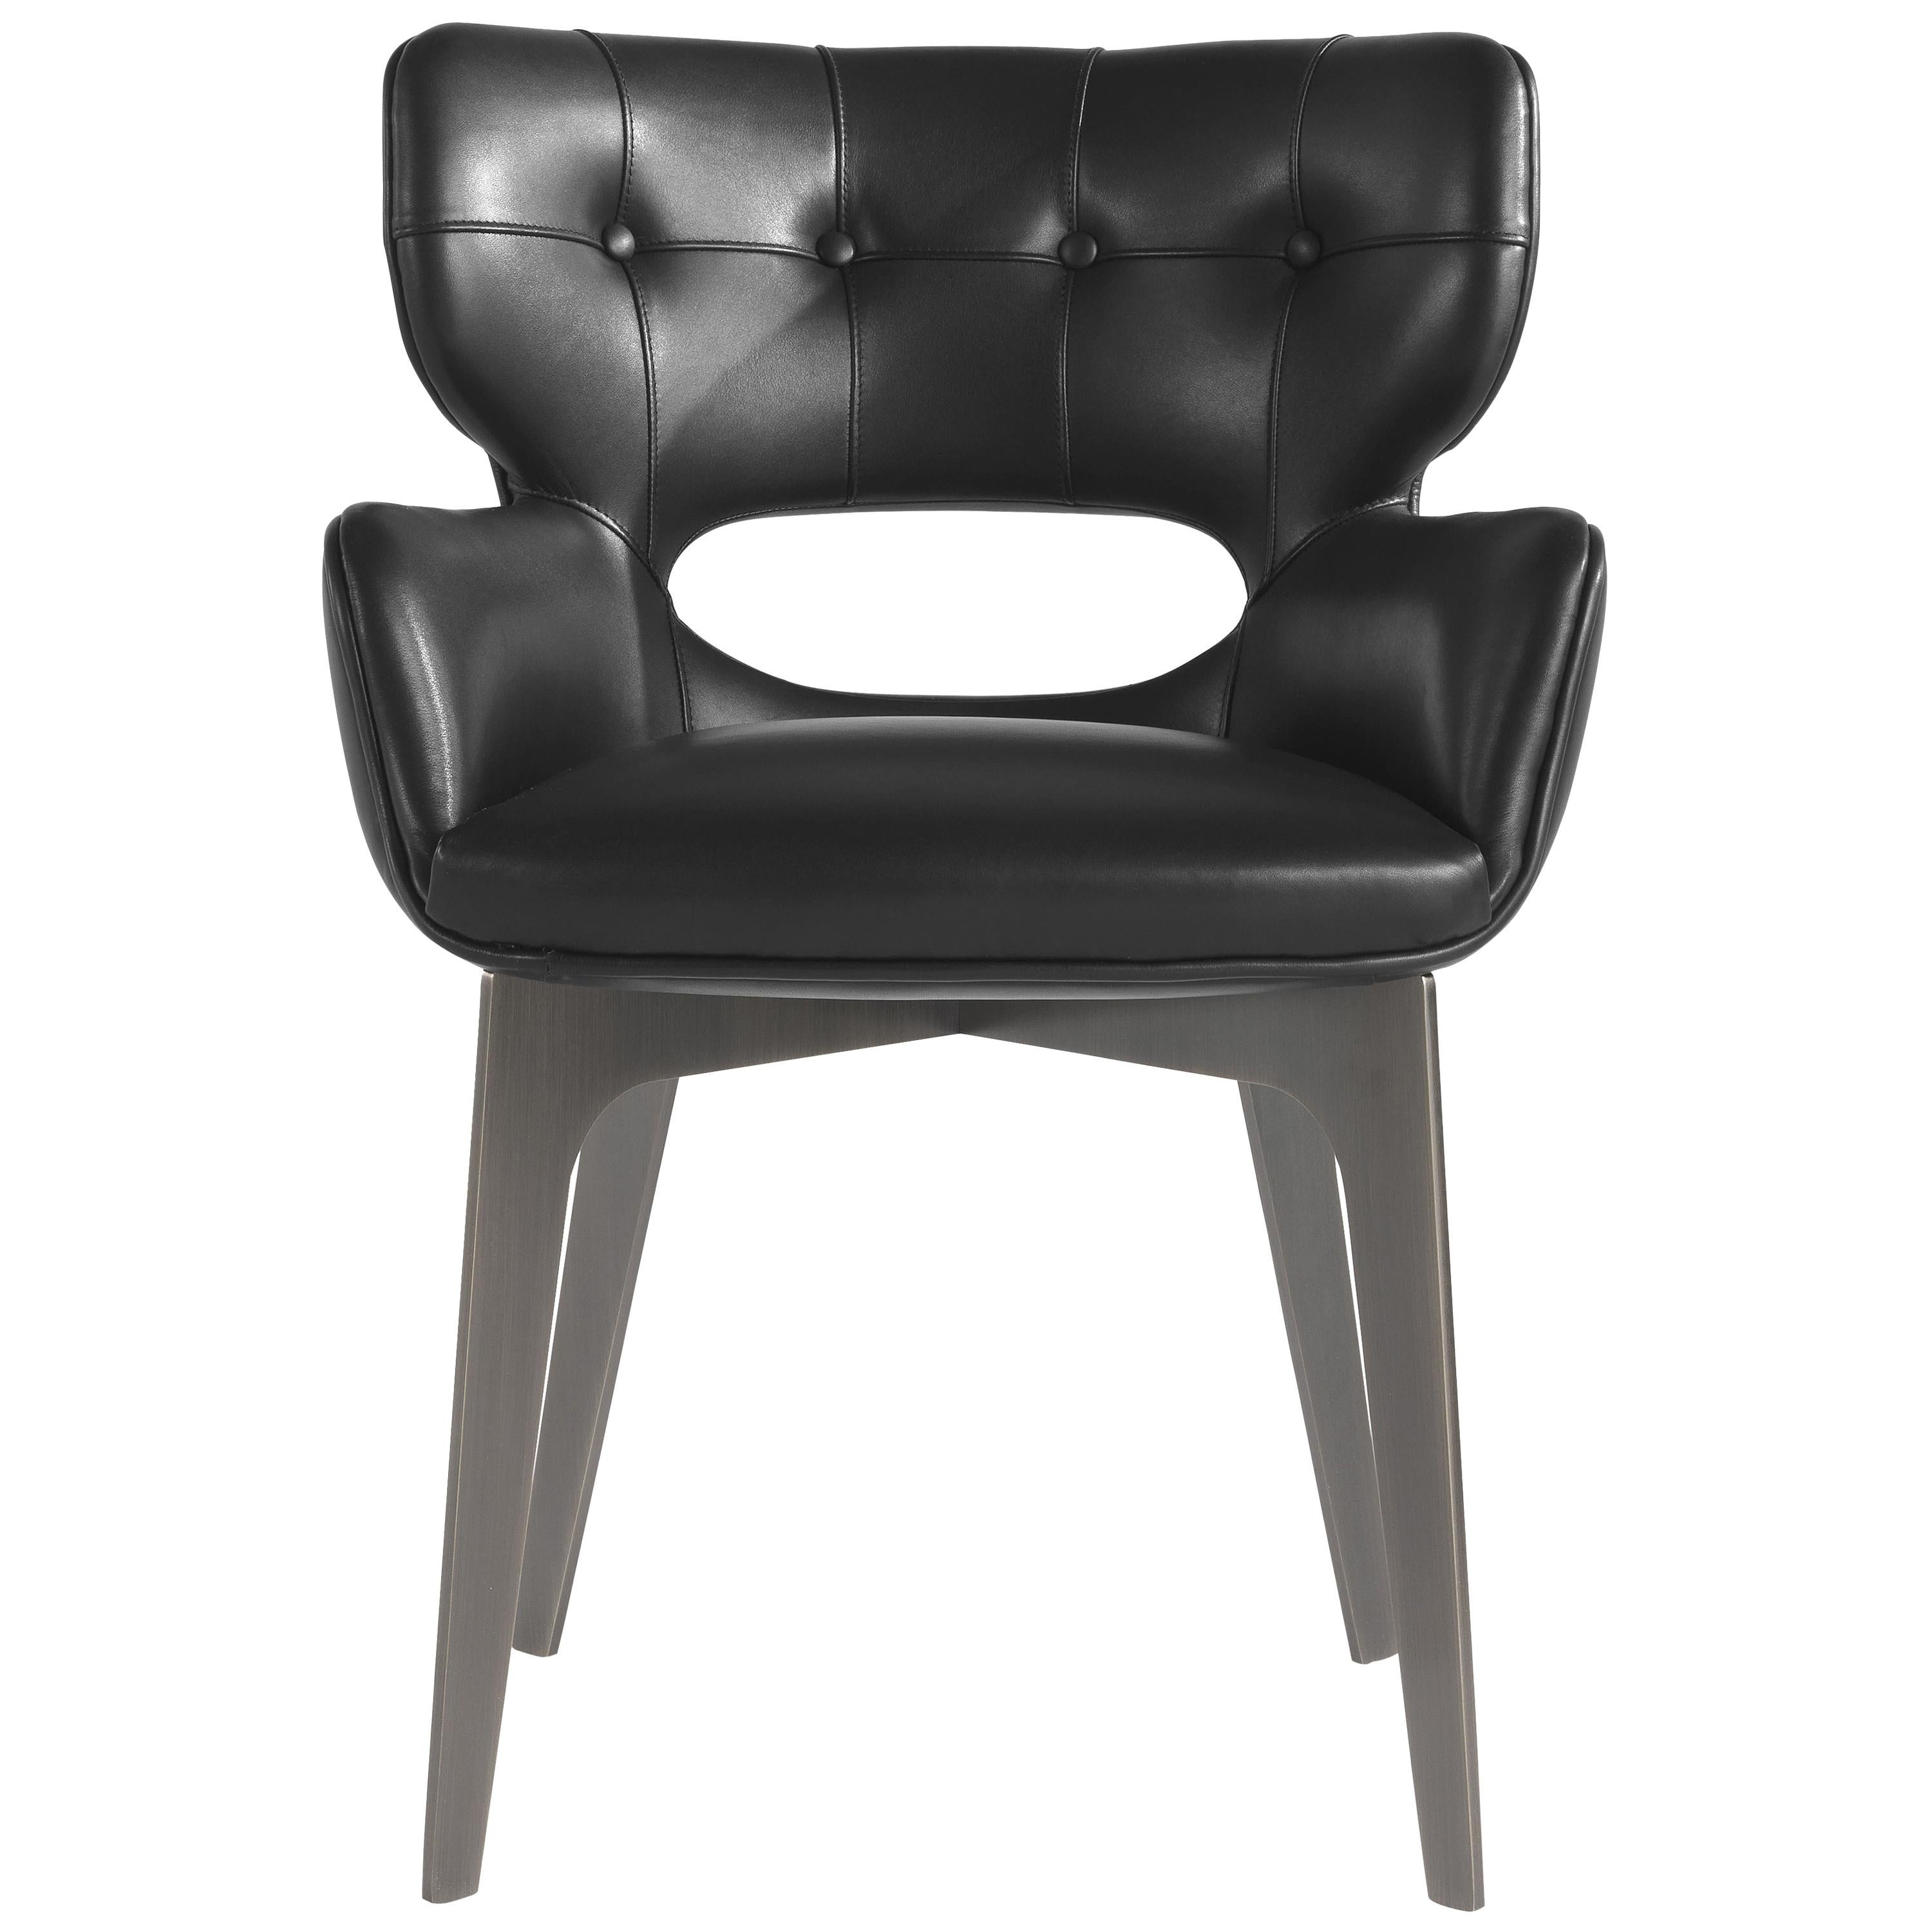 21st Century Maclaine Chair in Black Leather by Roberto Cavalli Home Interiors